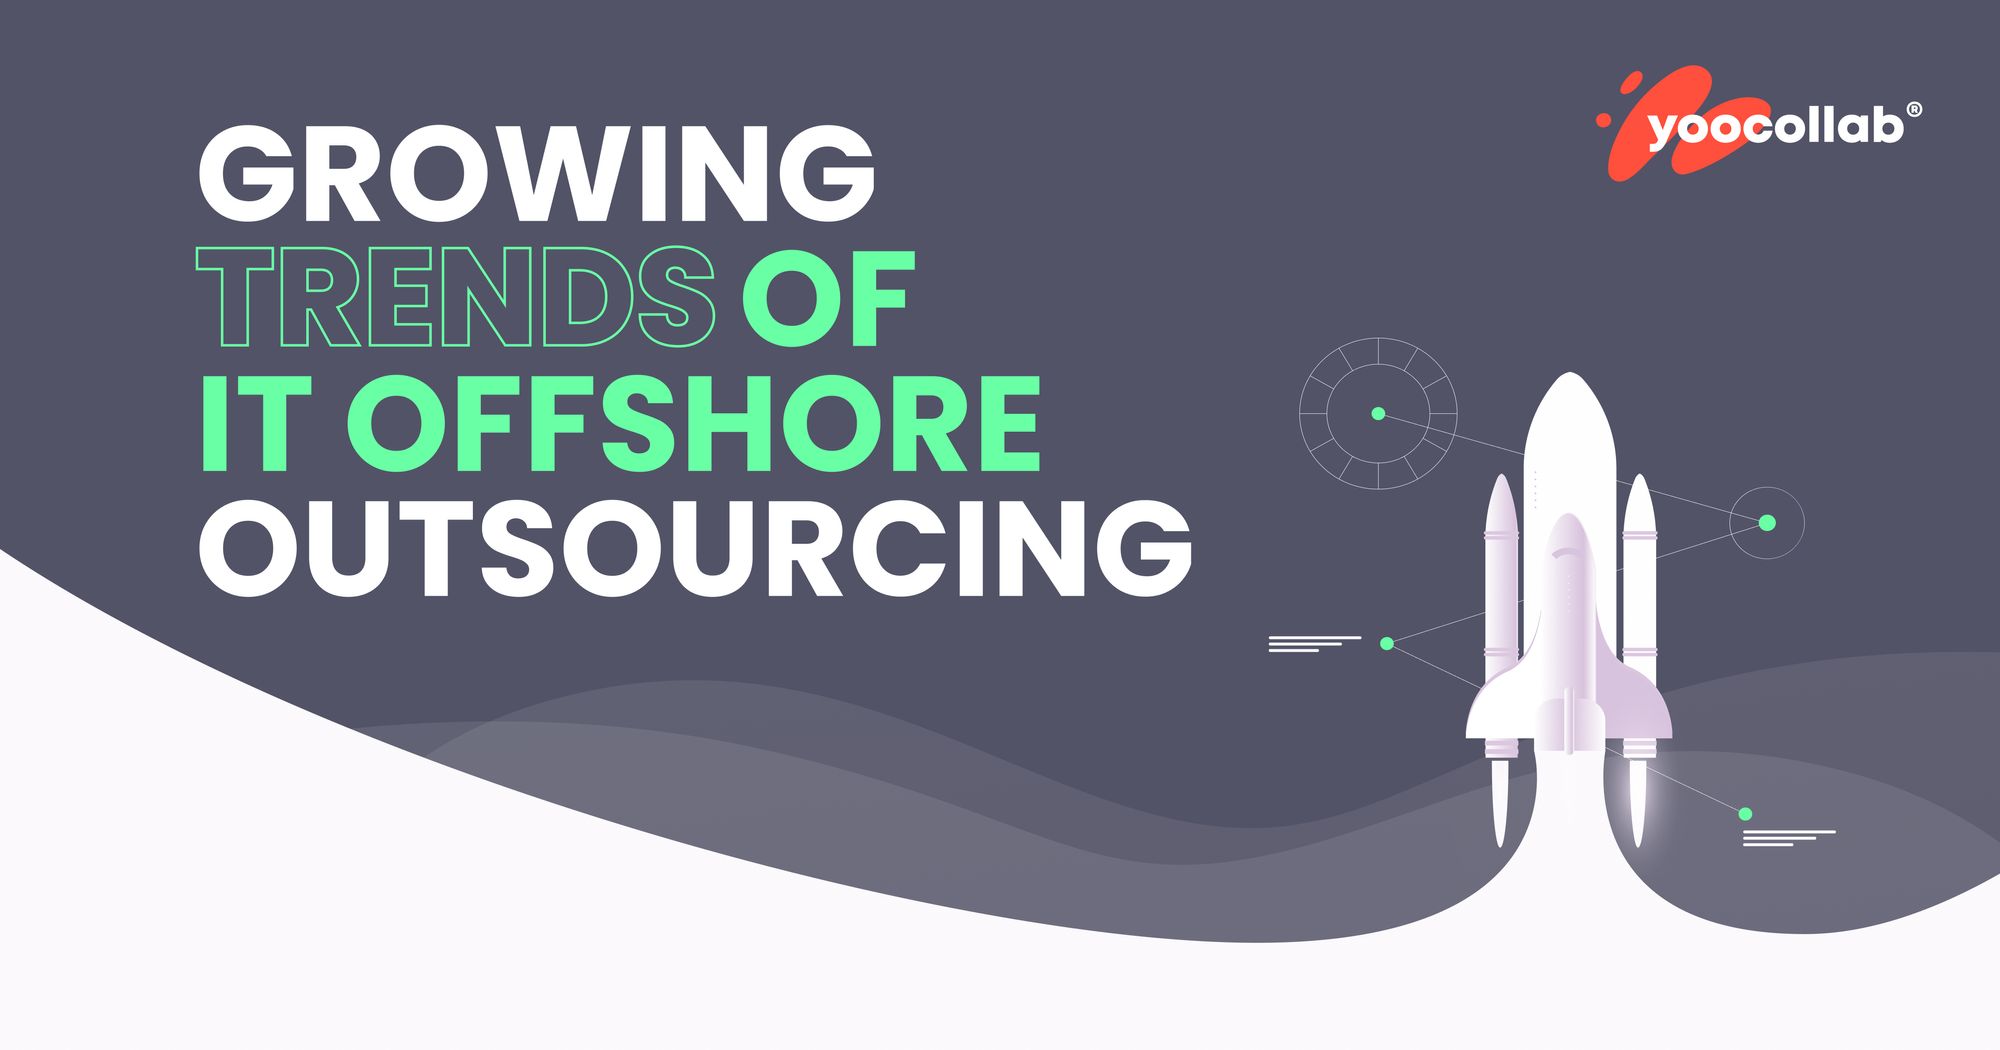 IT Offshore Outsourcing